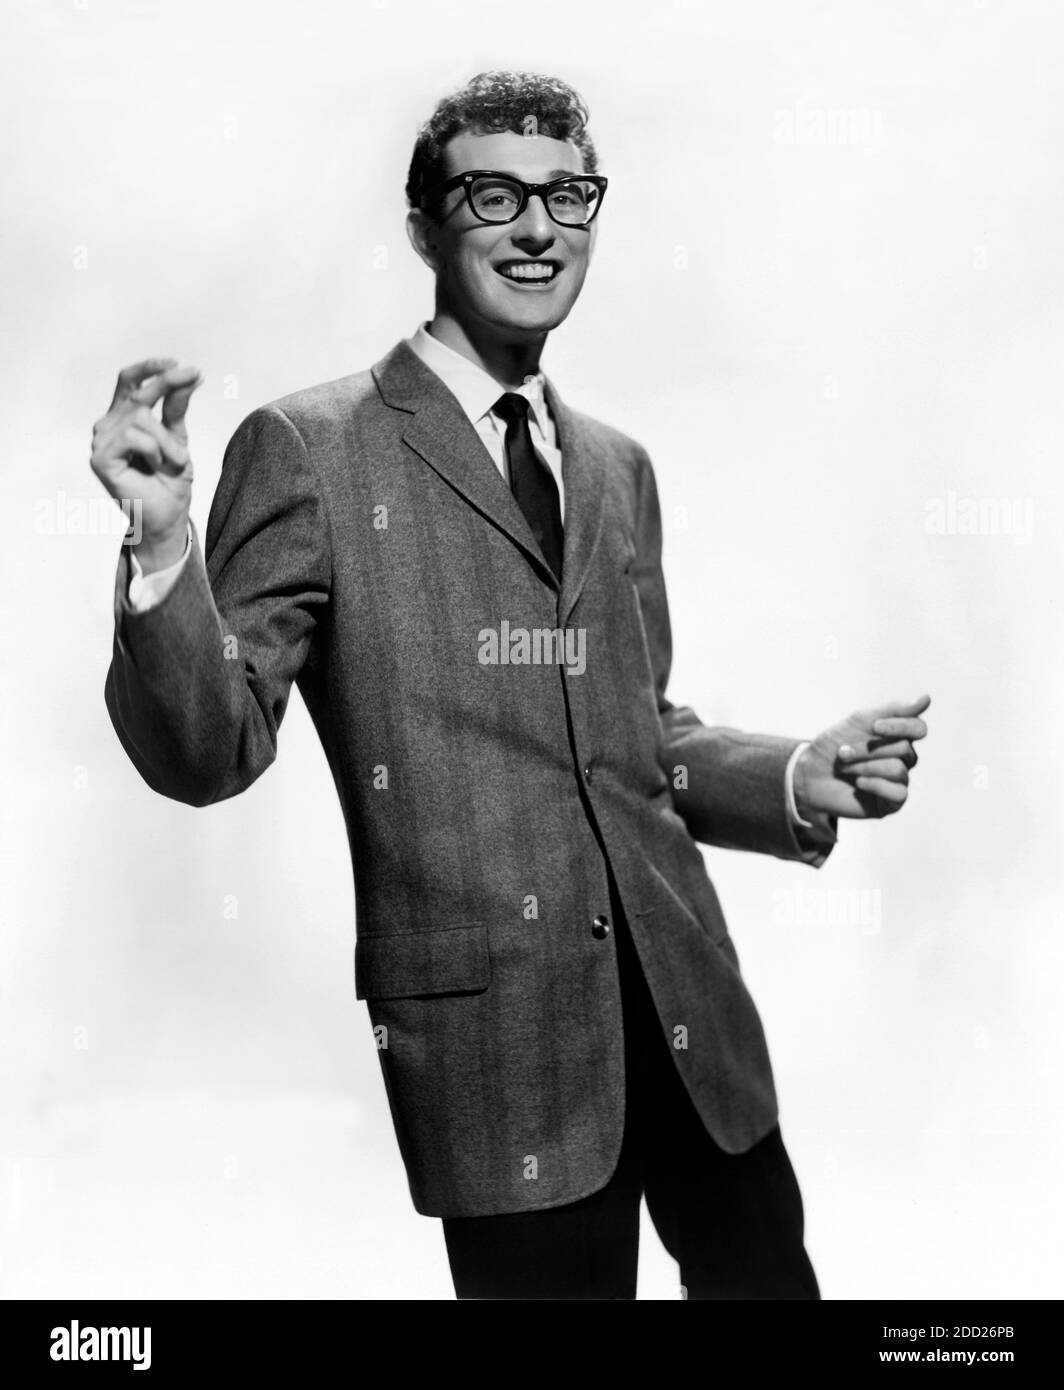 1958 ca. , USA : The celebrated  Rock'n Roll  star , guitarist , singer and songwriter BUDDY HOLLY ( 1936 - 1959 ). Buddy Holly dead on the ill-fated flight tyhe day 3 february 1959 that crashed on Clear Lake and killed him and also J.P. The Big Bopper Richardson and Richie Valens . Unknown photographer for Brunswick Records .-  ROCKABILLY - POP MUSIC - ROCK AND ROLL - ROCK'N ROLL - MUSICA LEGGERA - portrait - ritratto  - musicista - musician - chitarrista - musicista - ROCK - portrait - ritratto - ANNI CINQUANTA - 50's - '50 - lens - smile - sorriso - disastro aereo - dance - danza ---  ARCHI Stock Photo